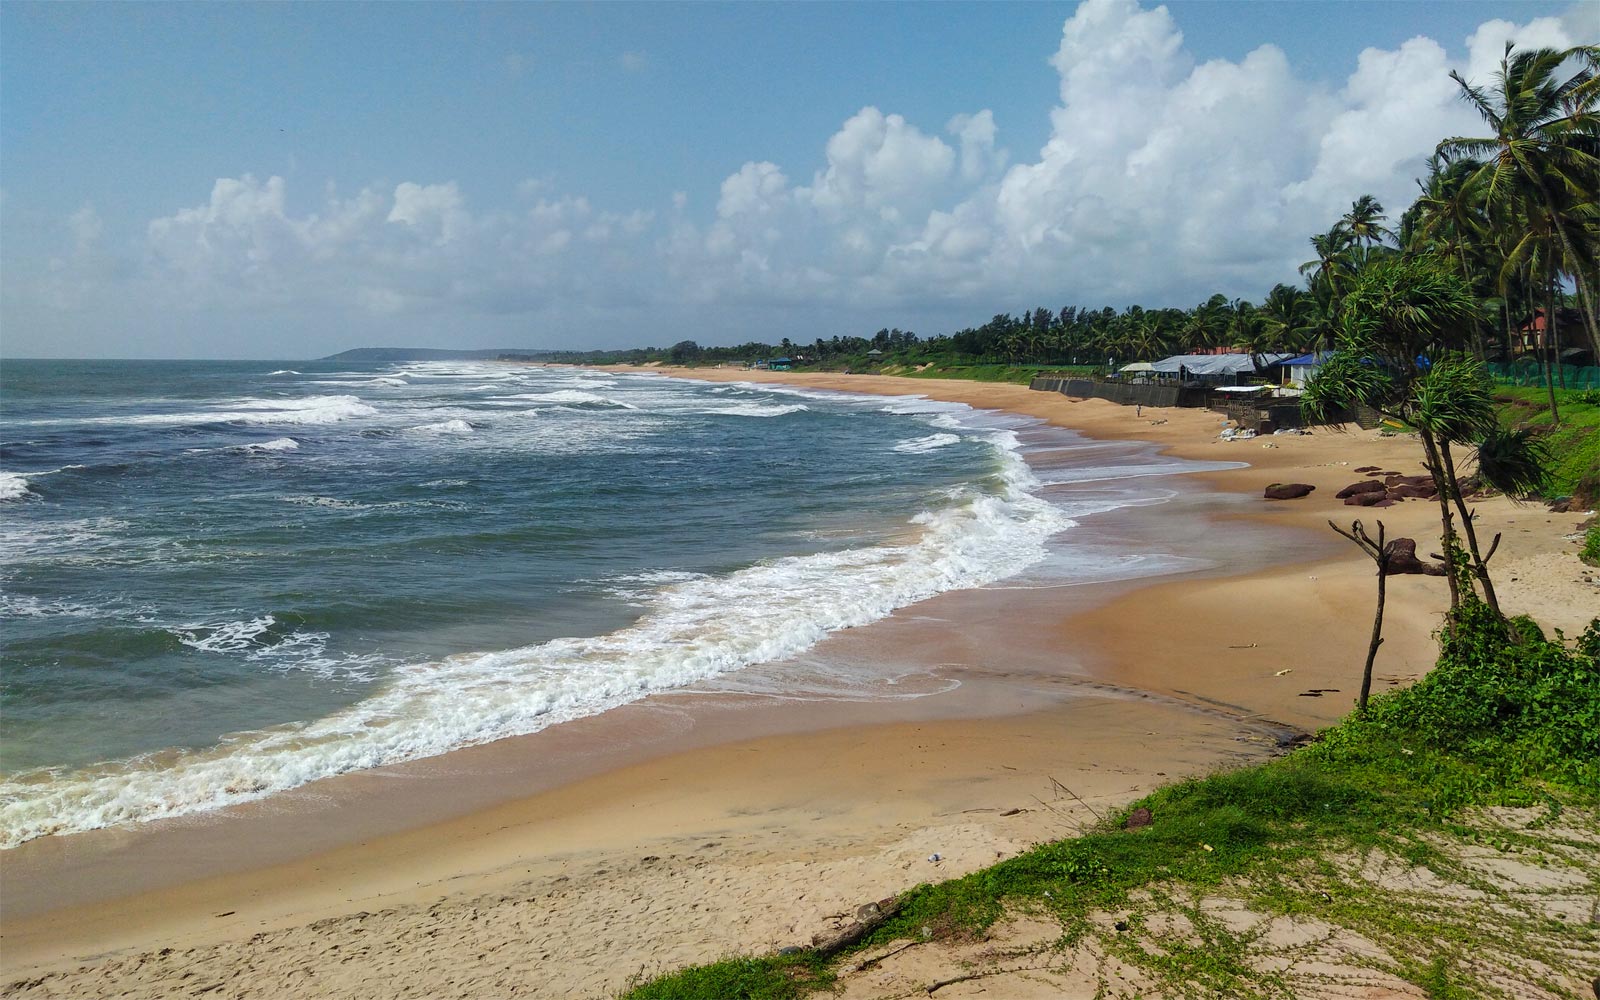 Sinquerim Beach Goa - Timings, Entry Ticket, Best Season, Attractions & More